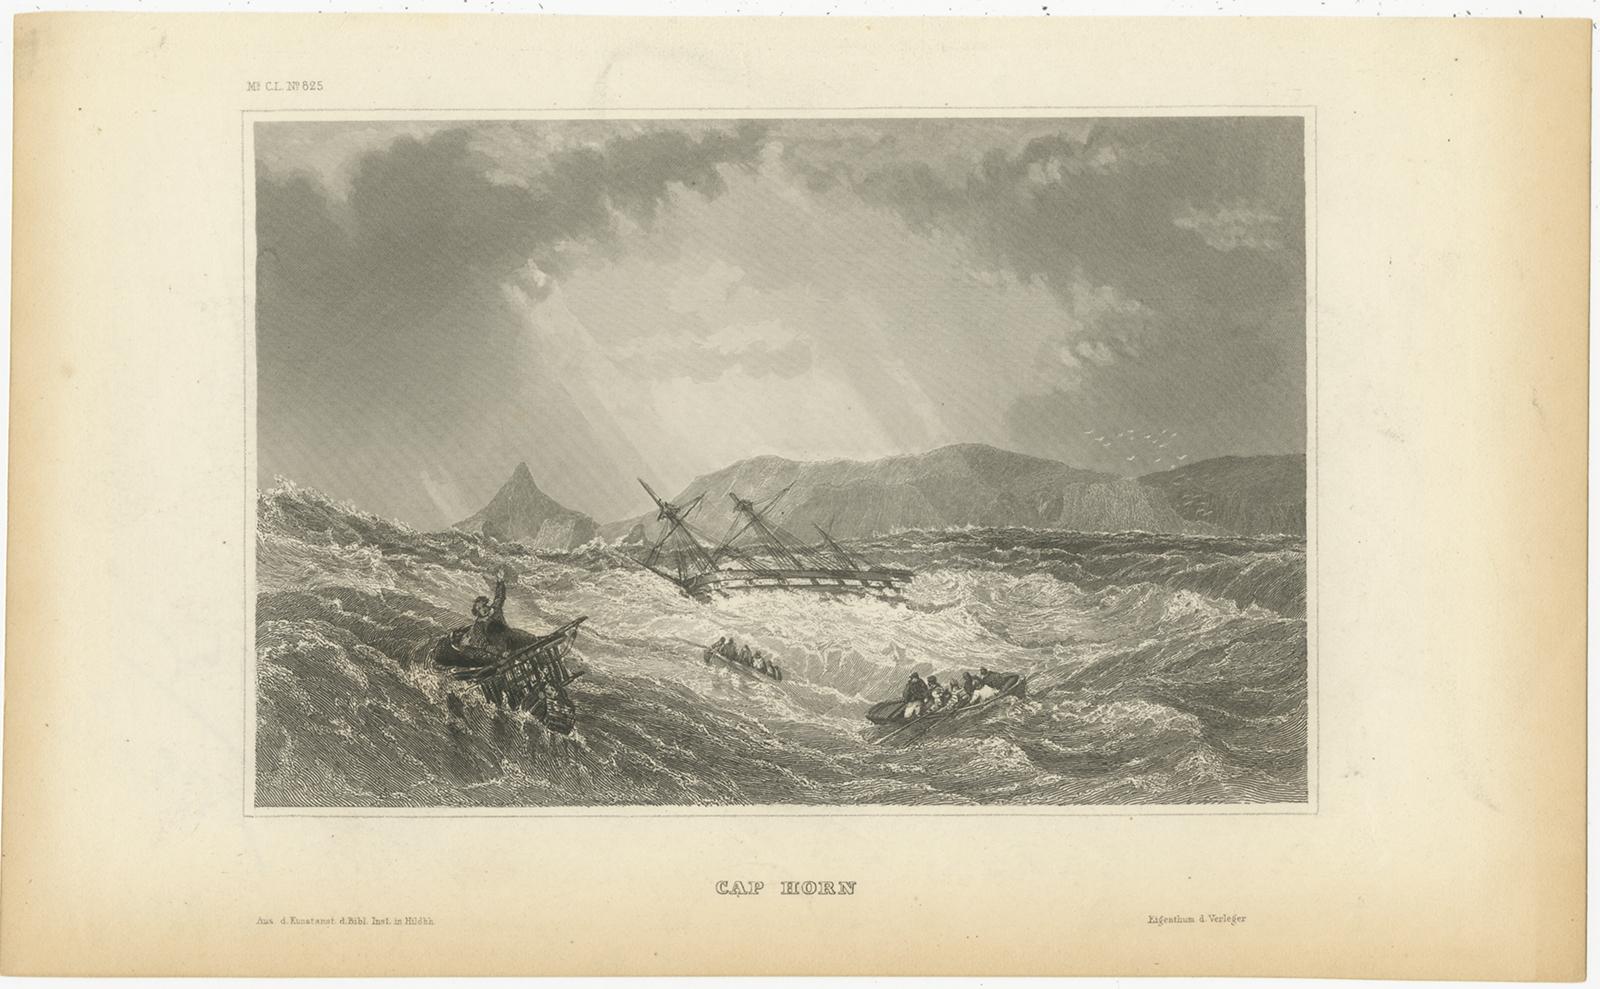 Antique print titled 'Cap Horn'. View of Cape Horn, the southernmost headland of the Tierra del Fuego archipelago of southern Chile, located on the small Hornos Island. Originates from 'Meyers Universum'. Published circa 1850.

Joseph Meyer (May